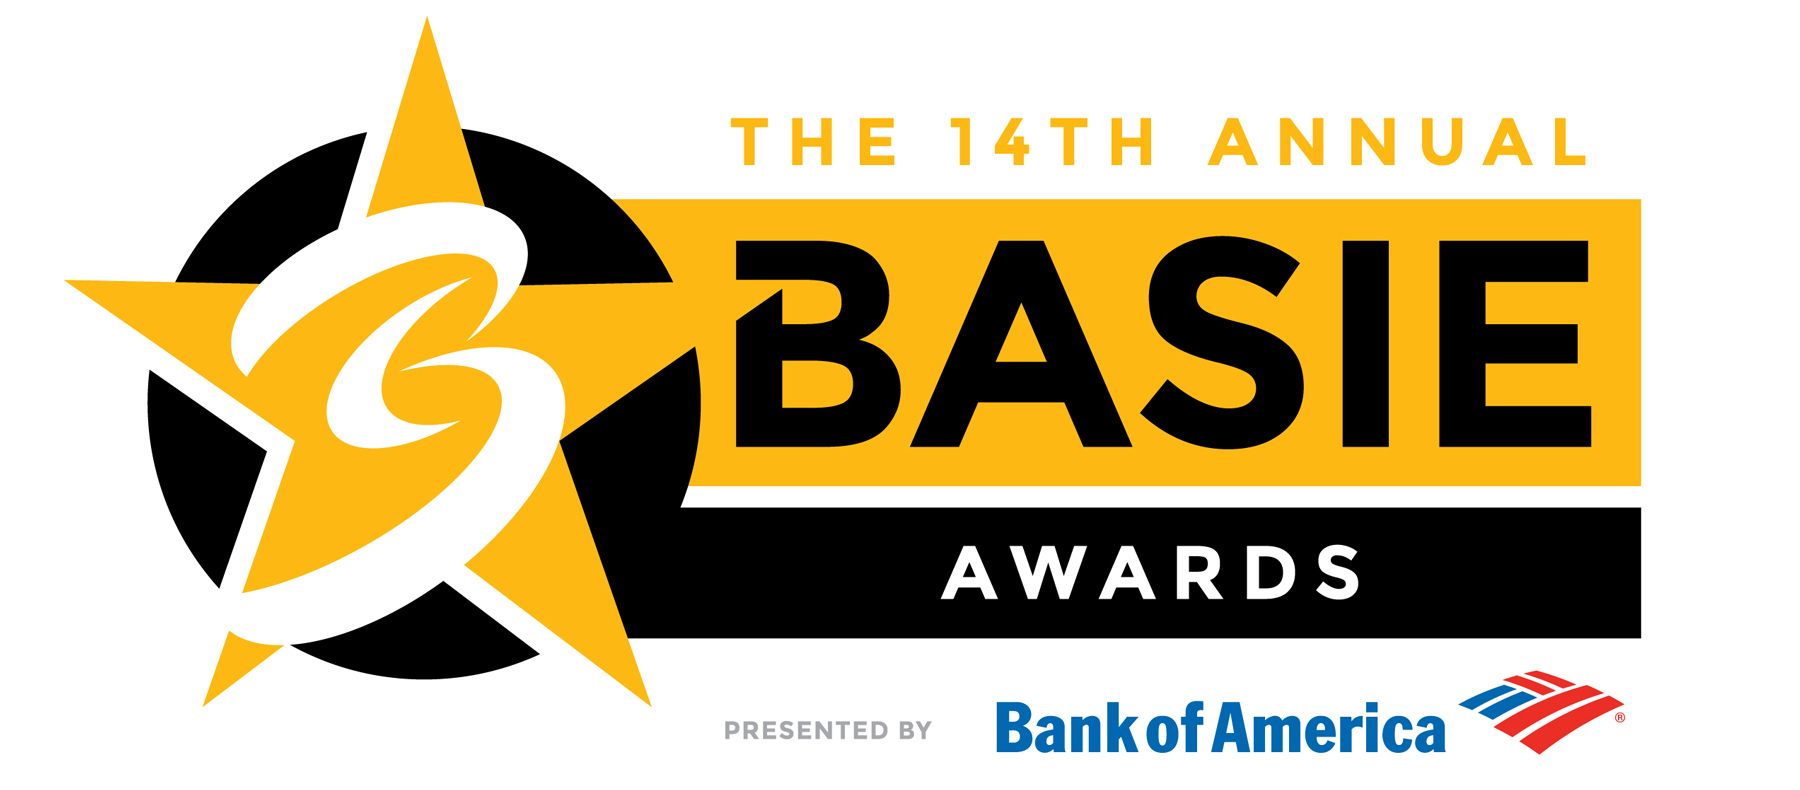 The Basie Awards Count Basie Center for the Arts